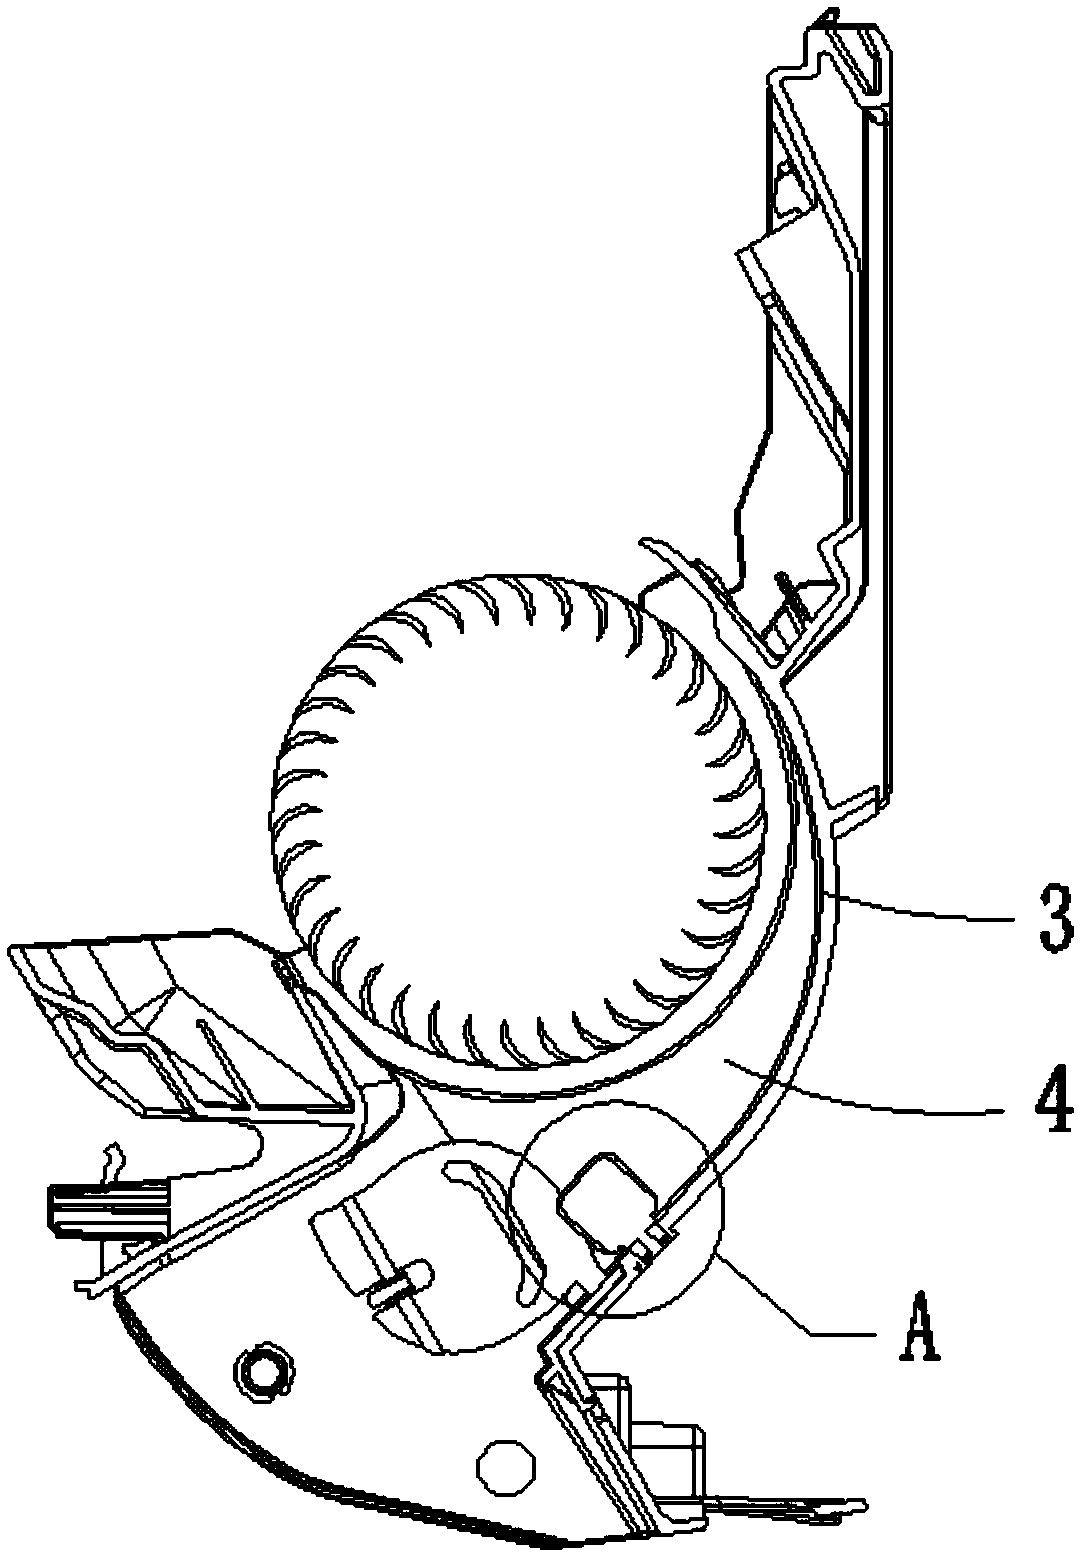 Air flow adjusting structure of air flue and air conditioner